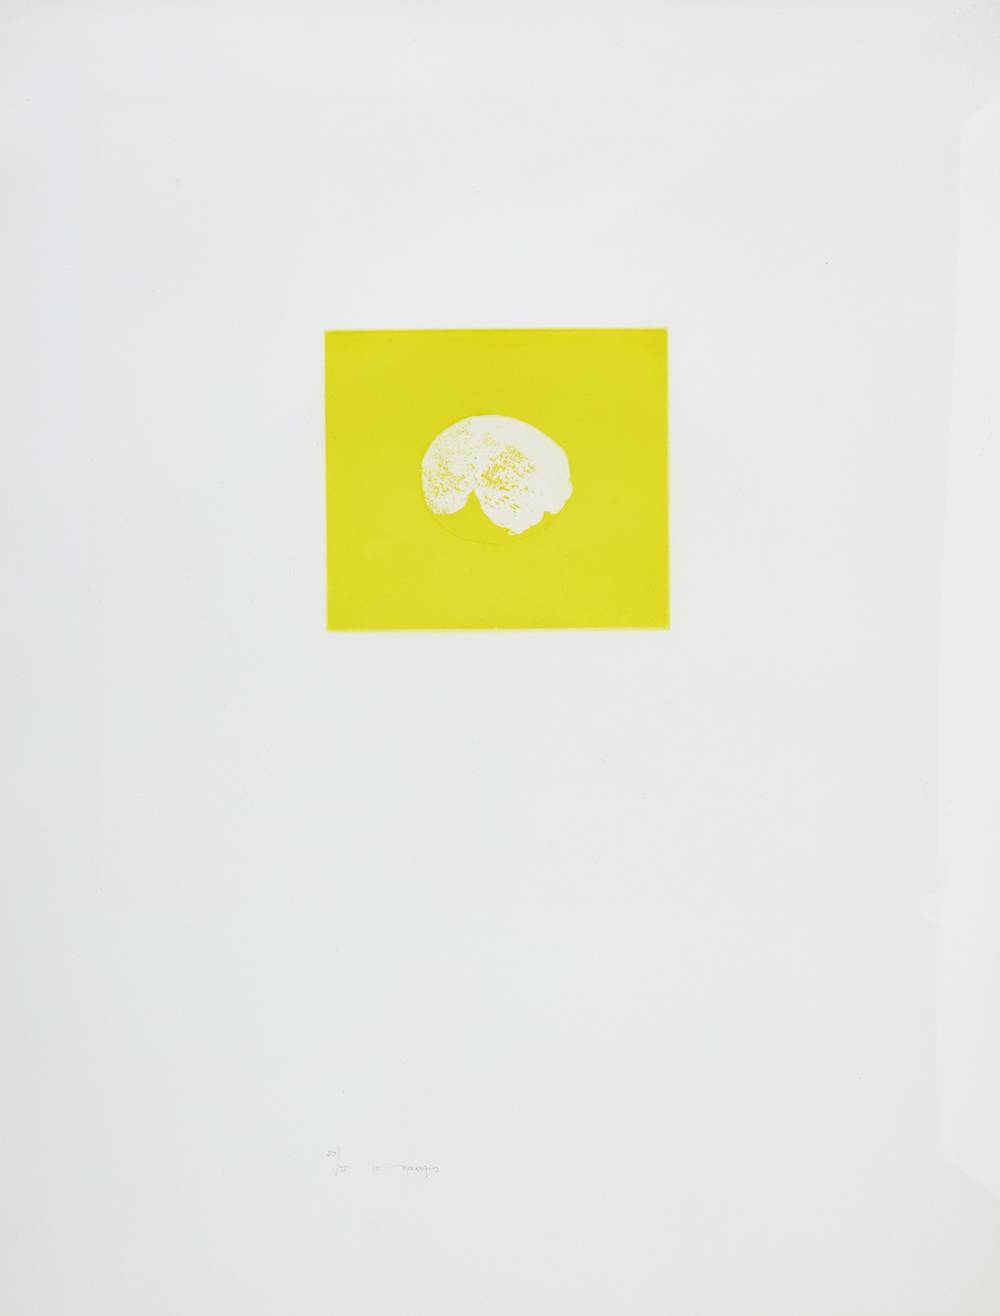 NO LEMON, 1974 by Louis le Brocquy HRHA (1916-2012) HRHA (1916-2012) at Whyte's Auctions